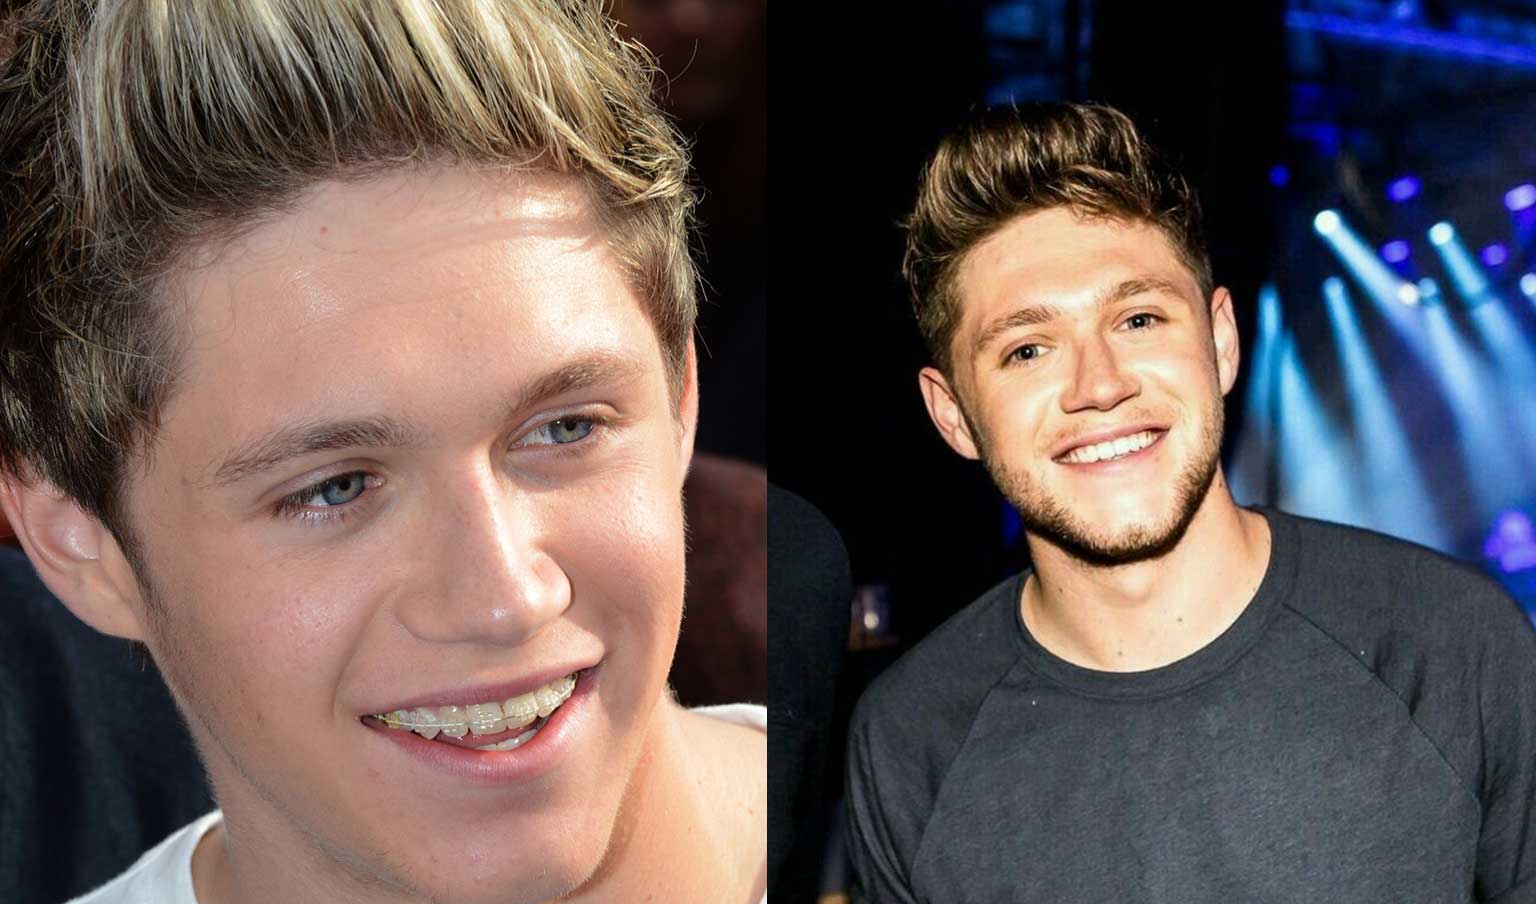 Niall Horan wearing braces and after braces